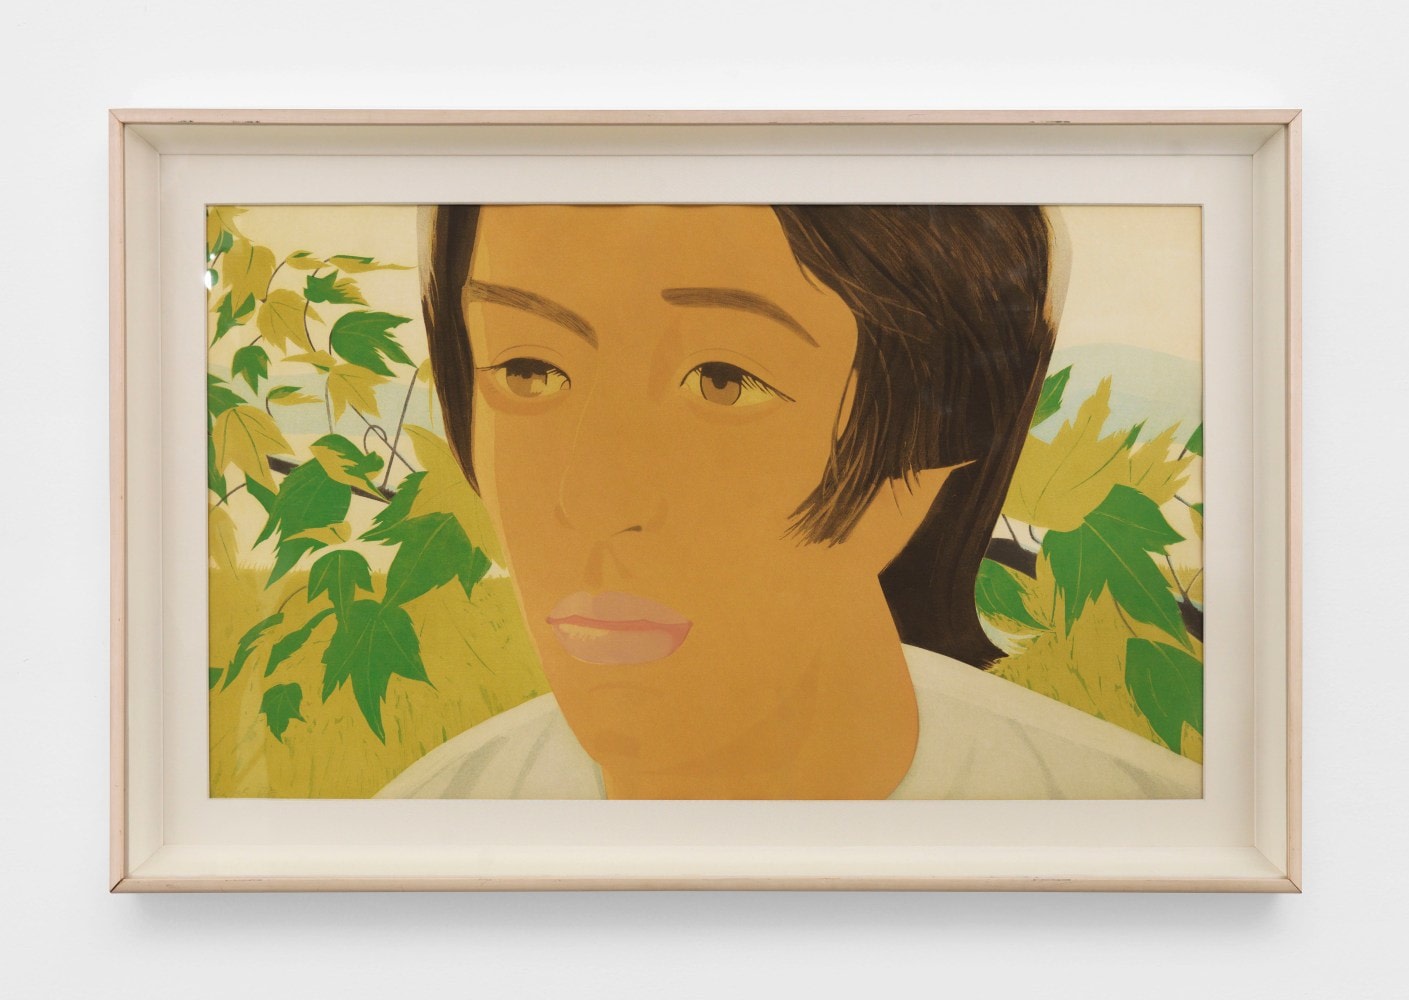 Boy with Branch I, 1975

color aquatint, edition of 90

24 1/4 x 40 1/2 in. / 61.6 x 102.9 cm